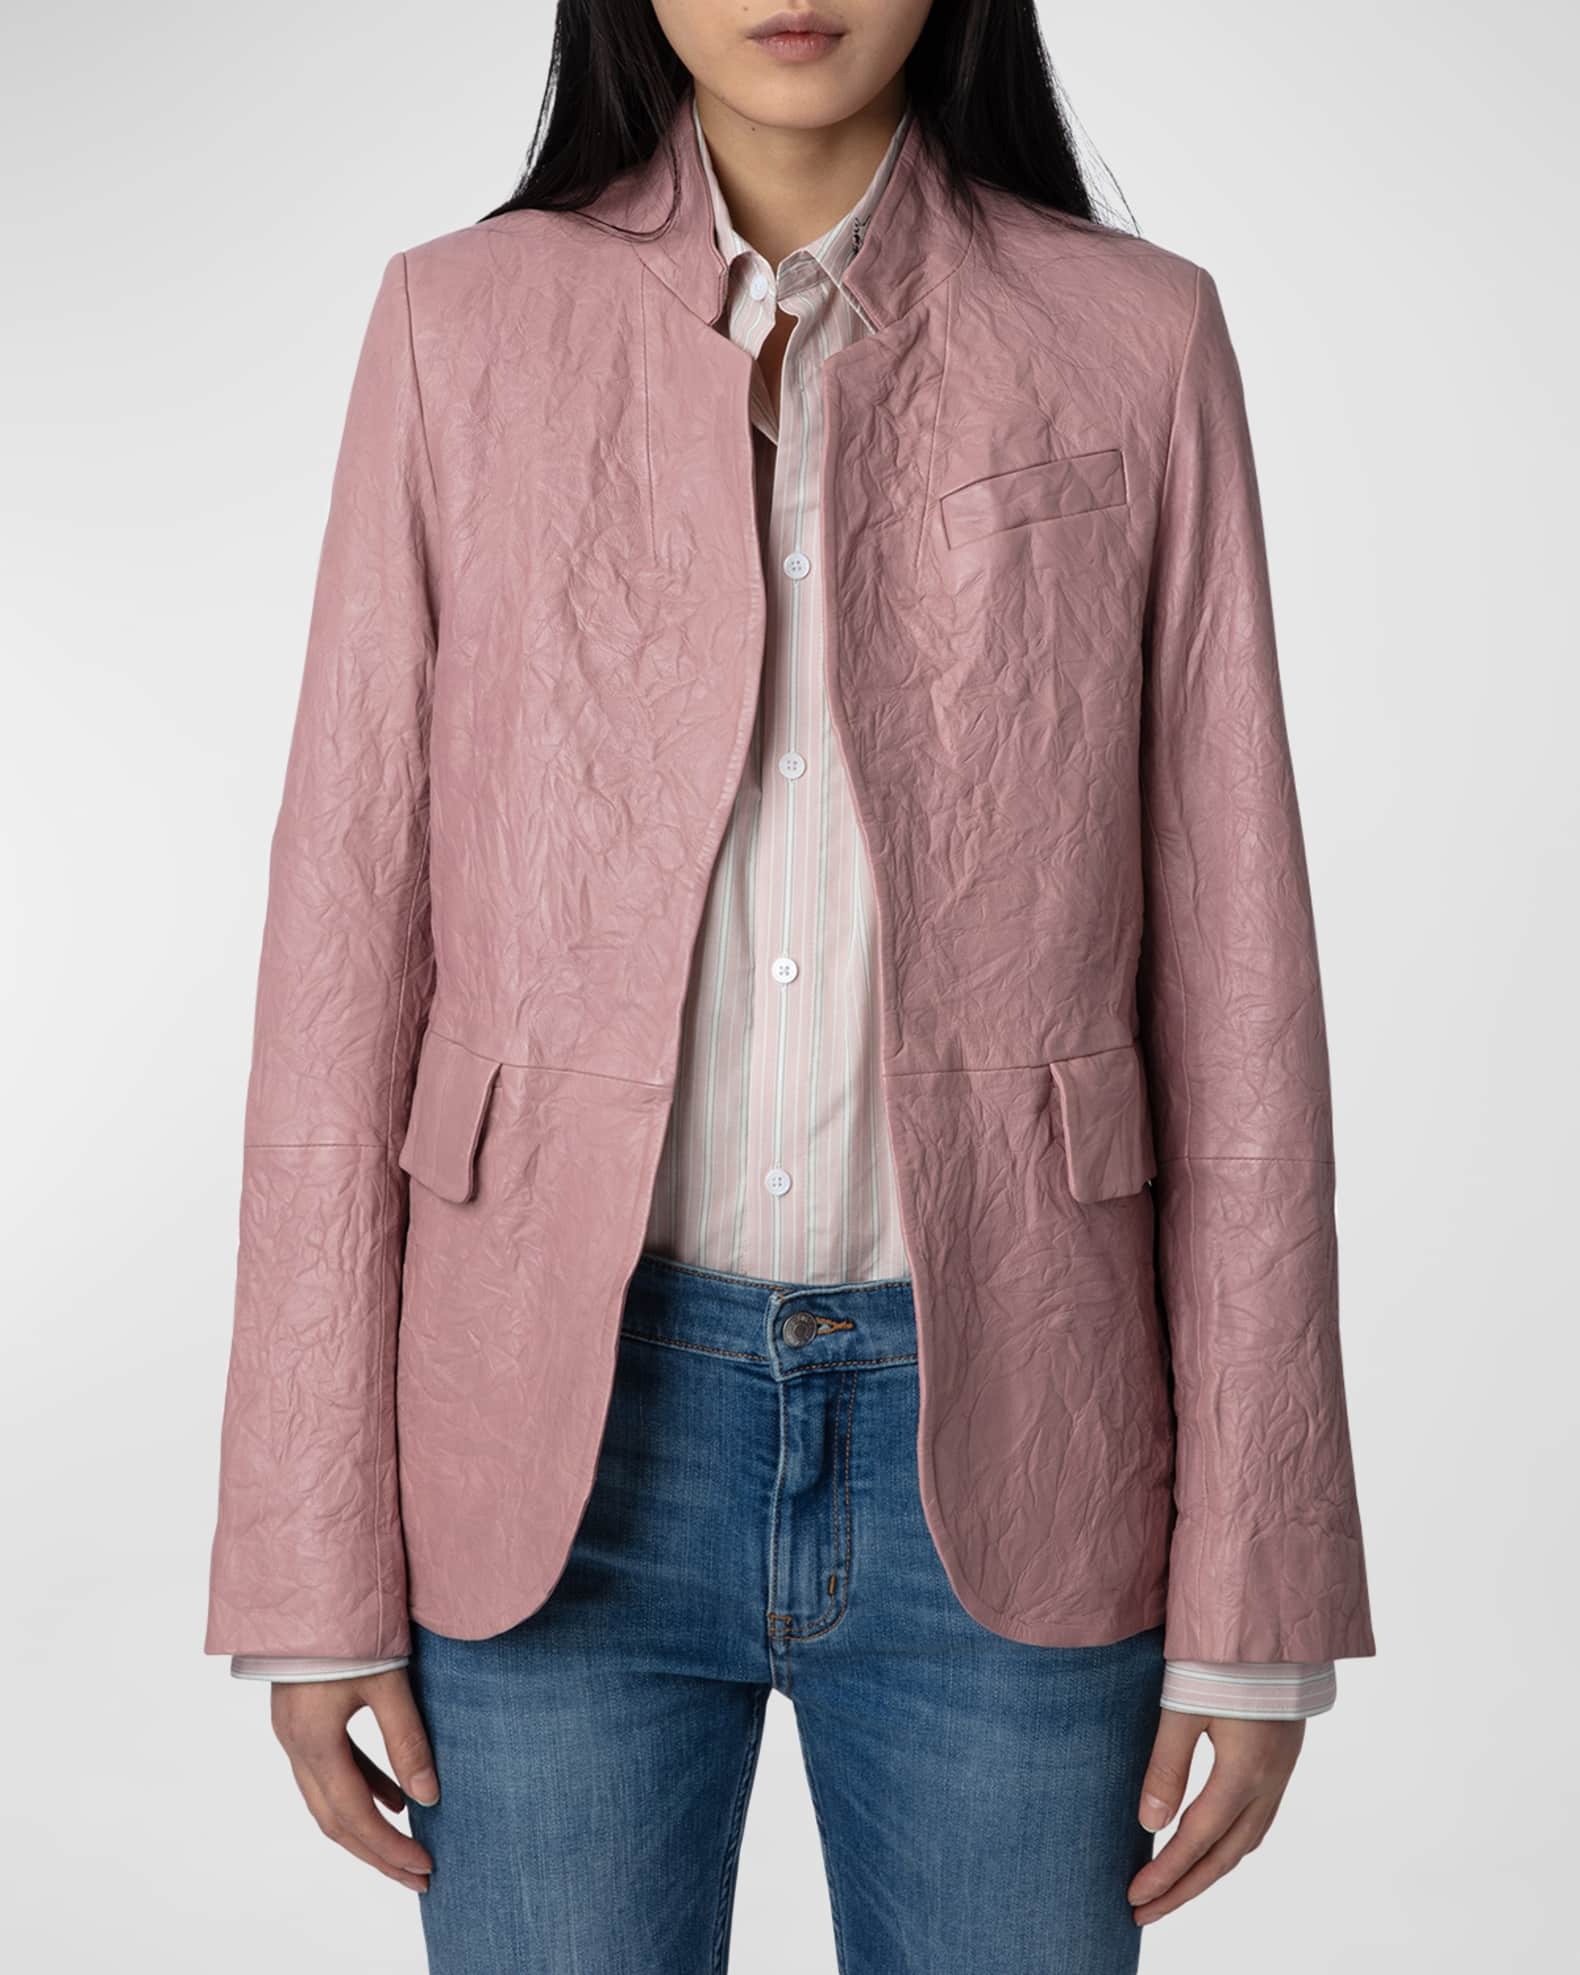 intentionally wrinkled leather blazer in dusty rose pink